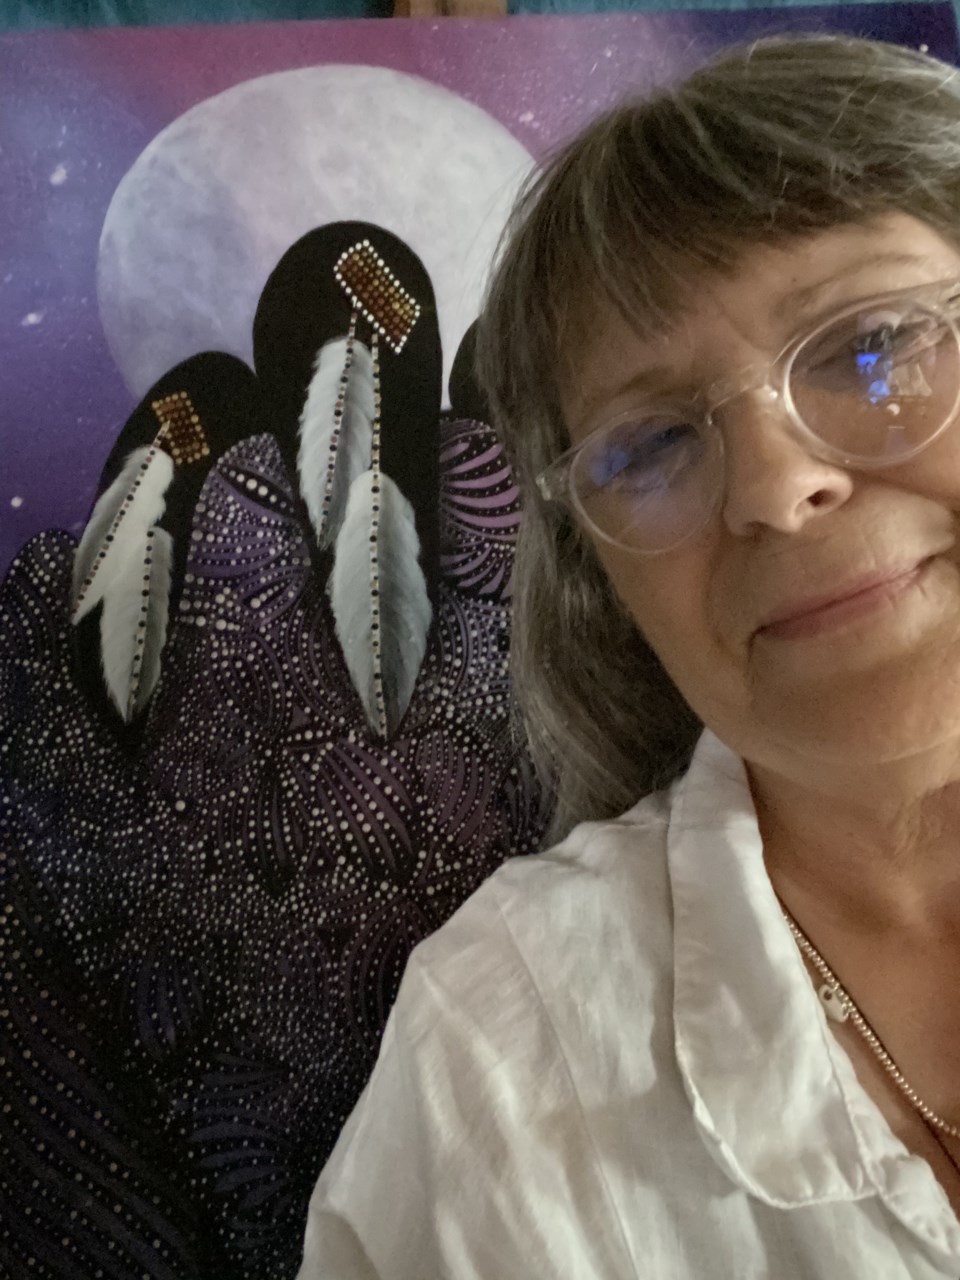 Cree artist wants to bring joy and beauty through her art Timmins News